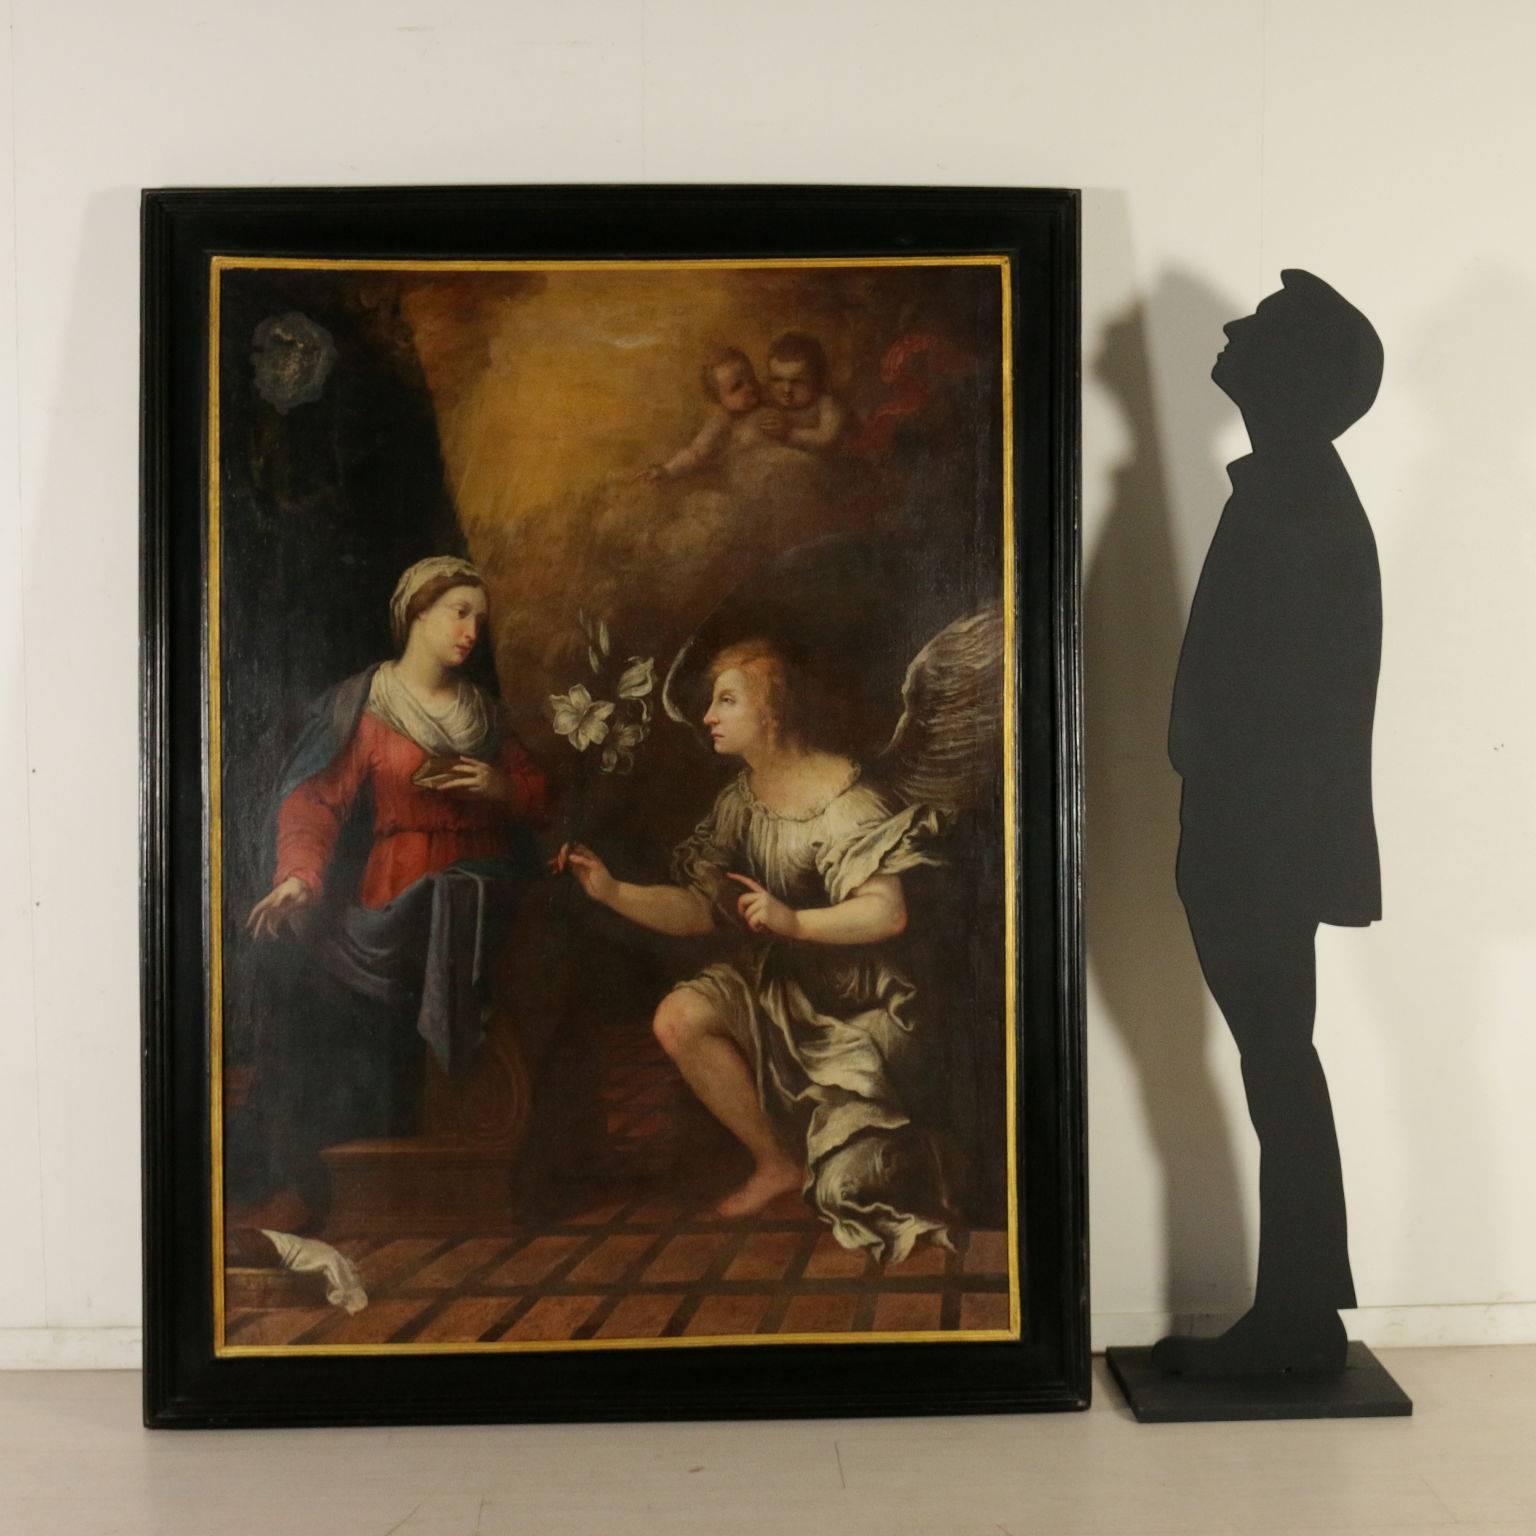 Annunciation Oil on Canvas Antique Painting 17th Century - Black Interior Painting by Unknown